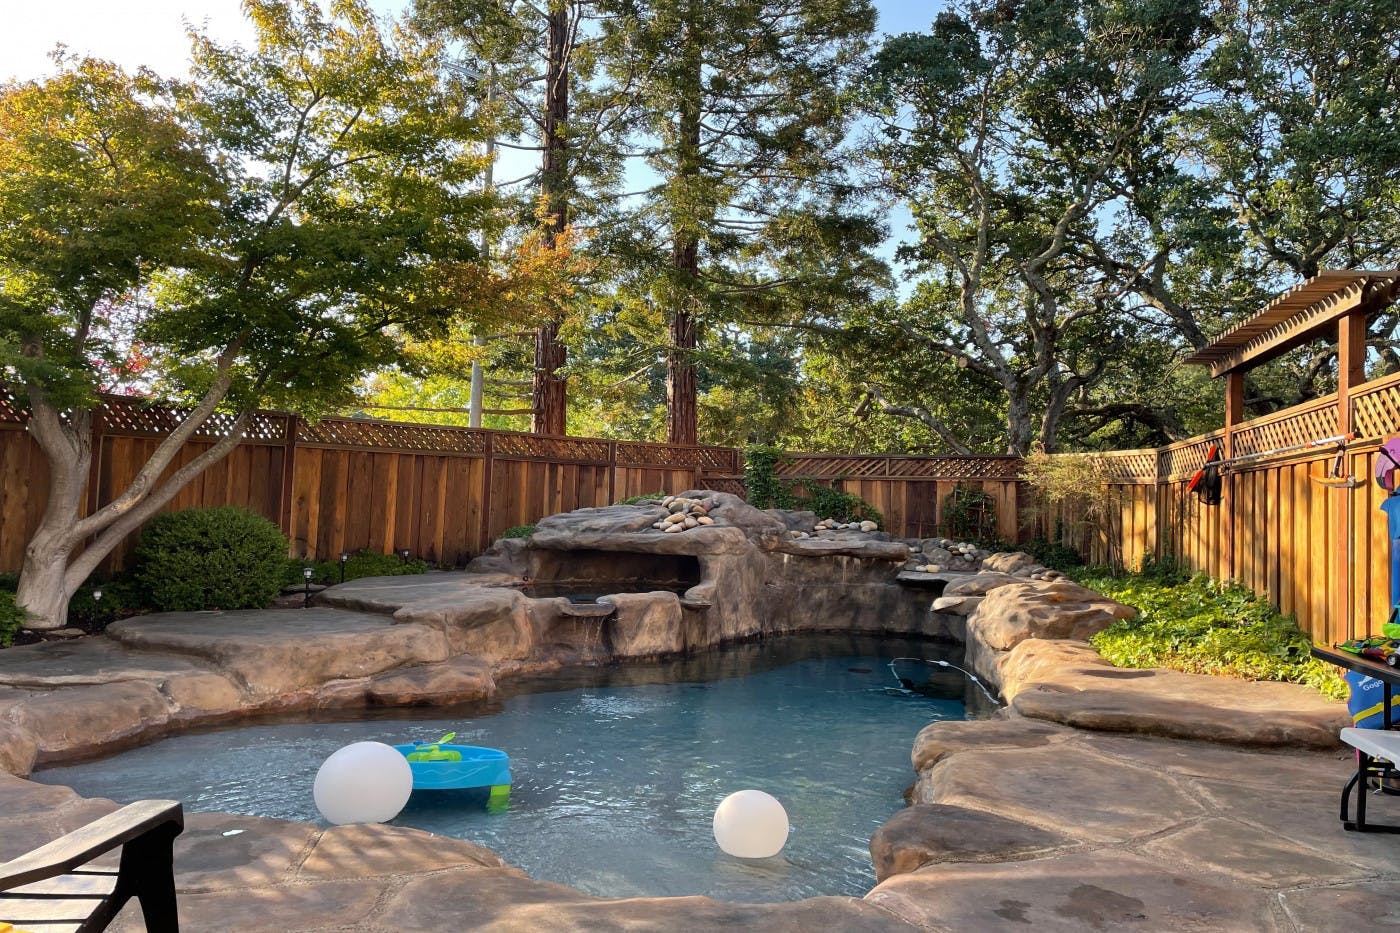 Beautiful Grotto Pool Perfect for Families!